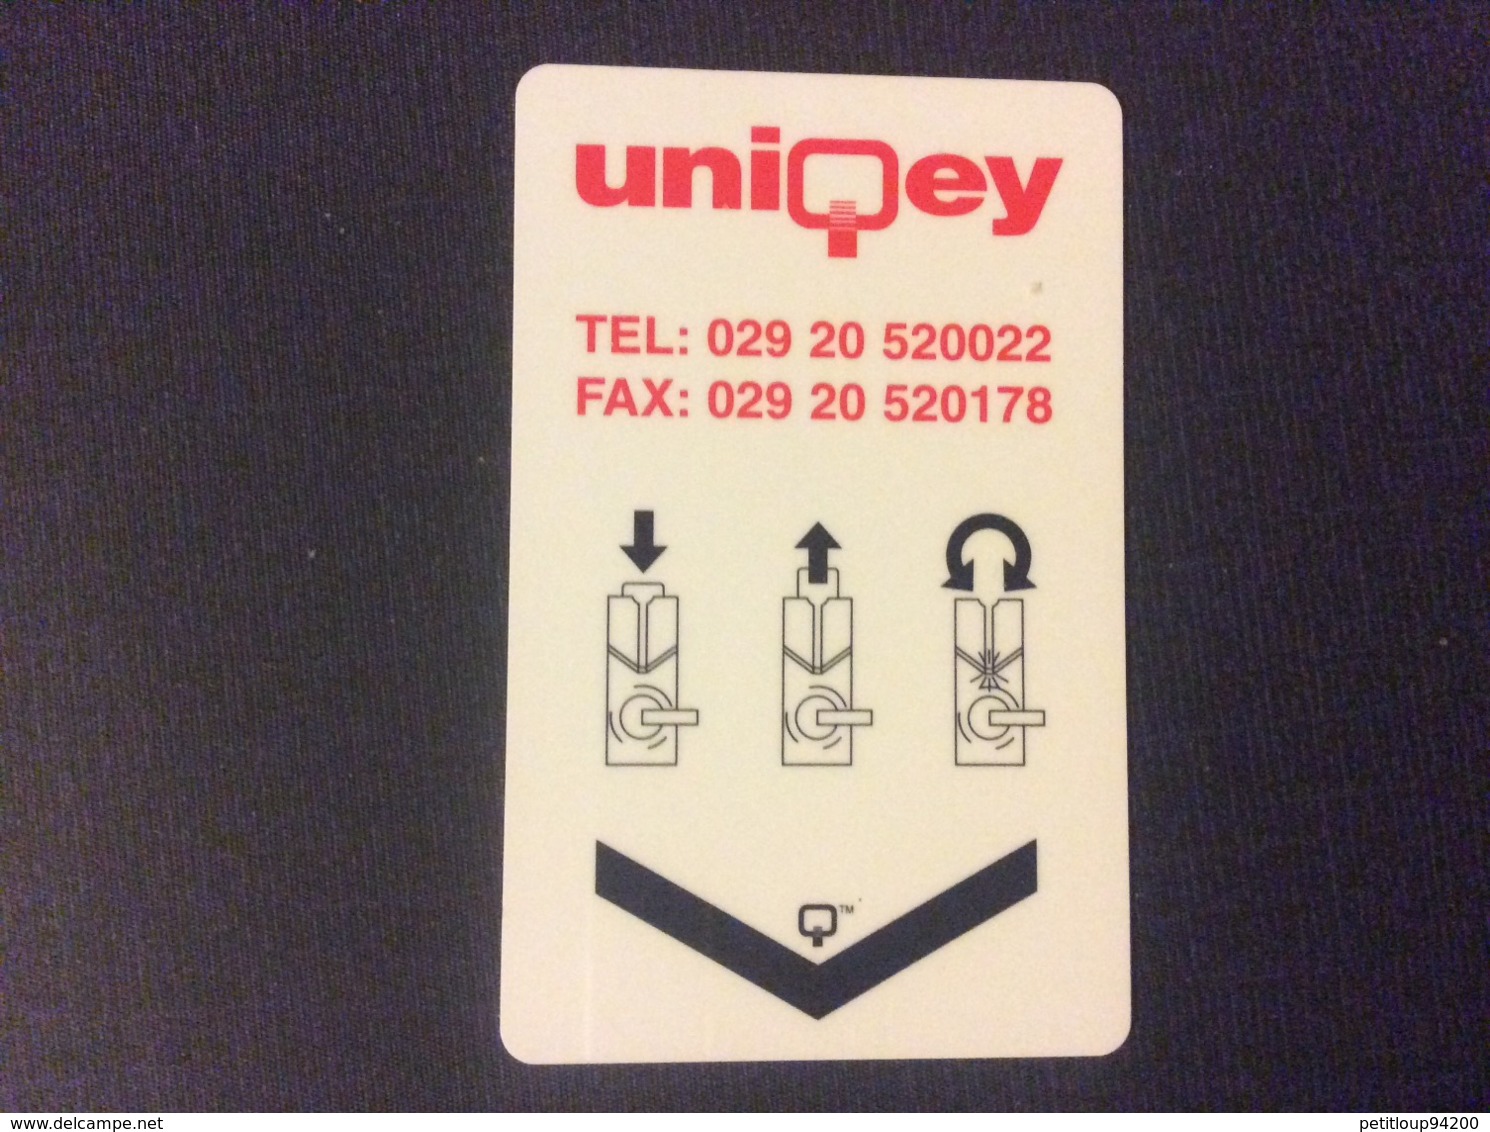 CLE D’HOTEL Uniqey - Hotel Key Cards